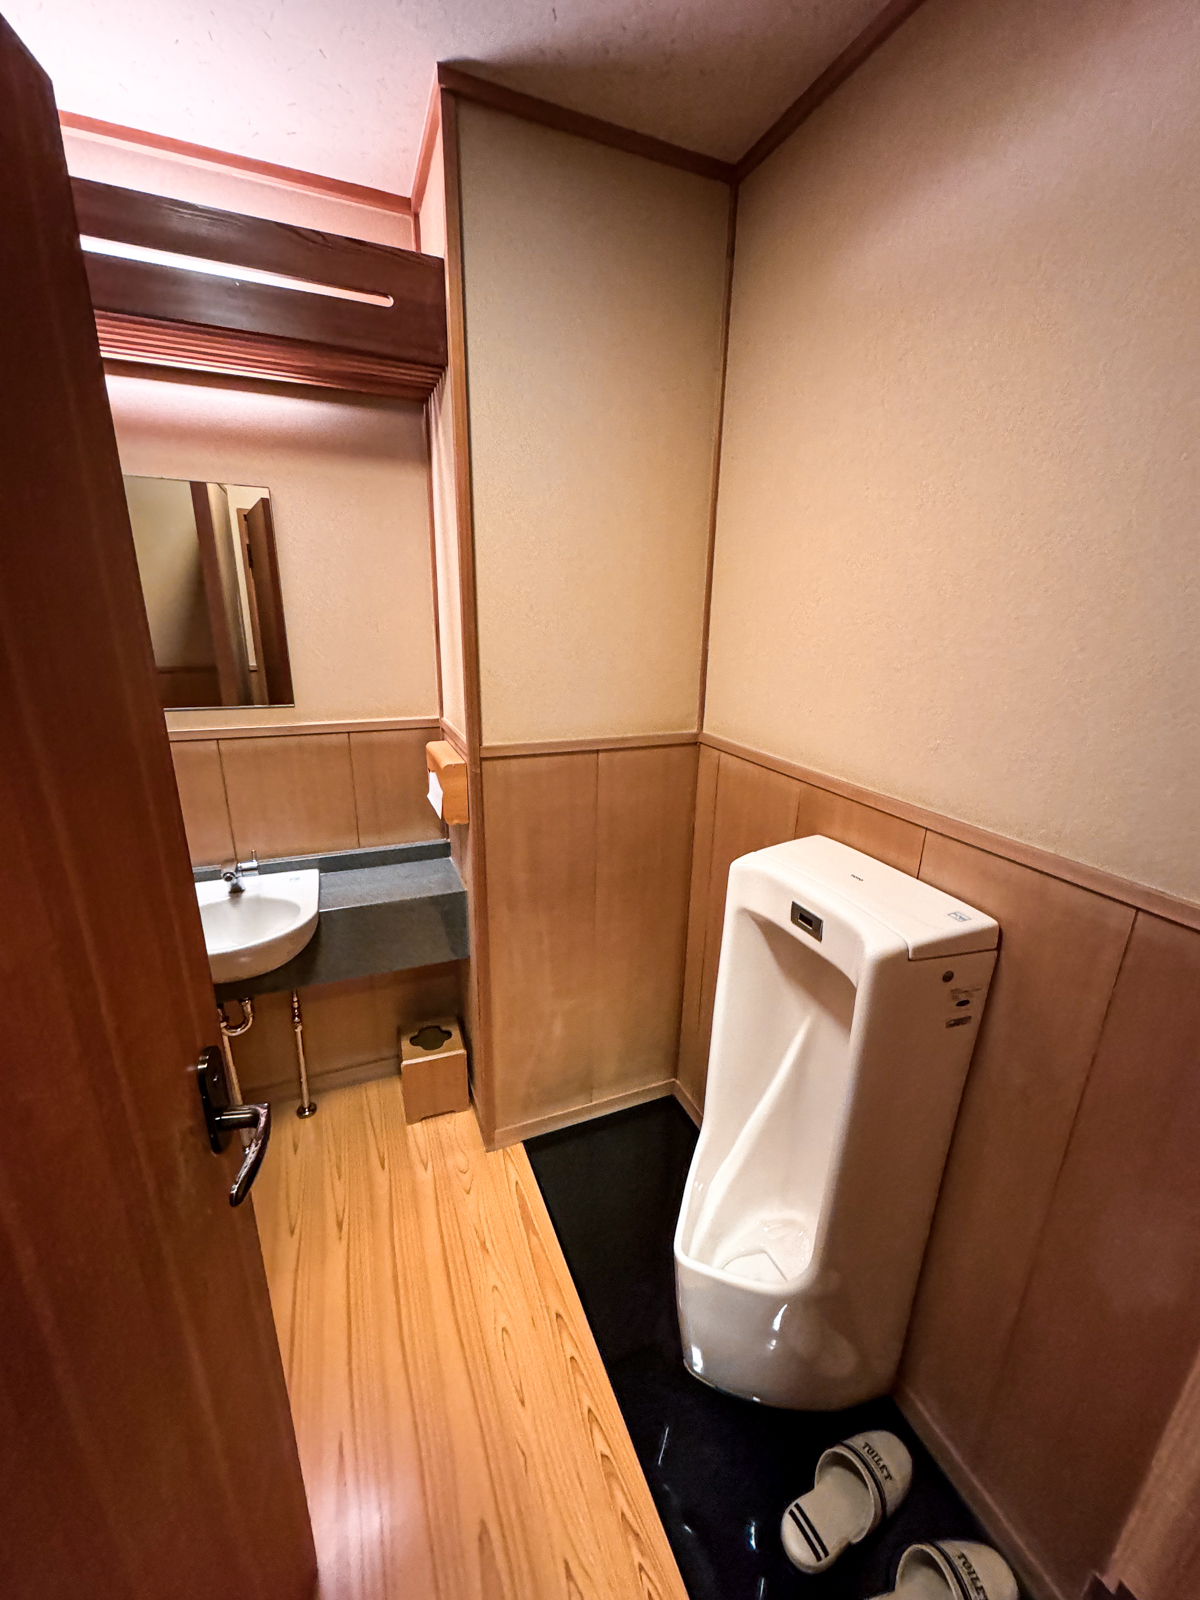 Toilet room with slippers and urinal.